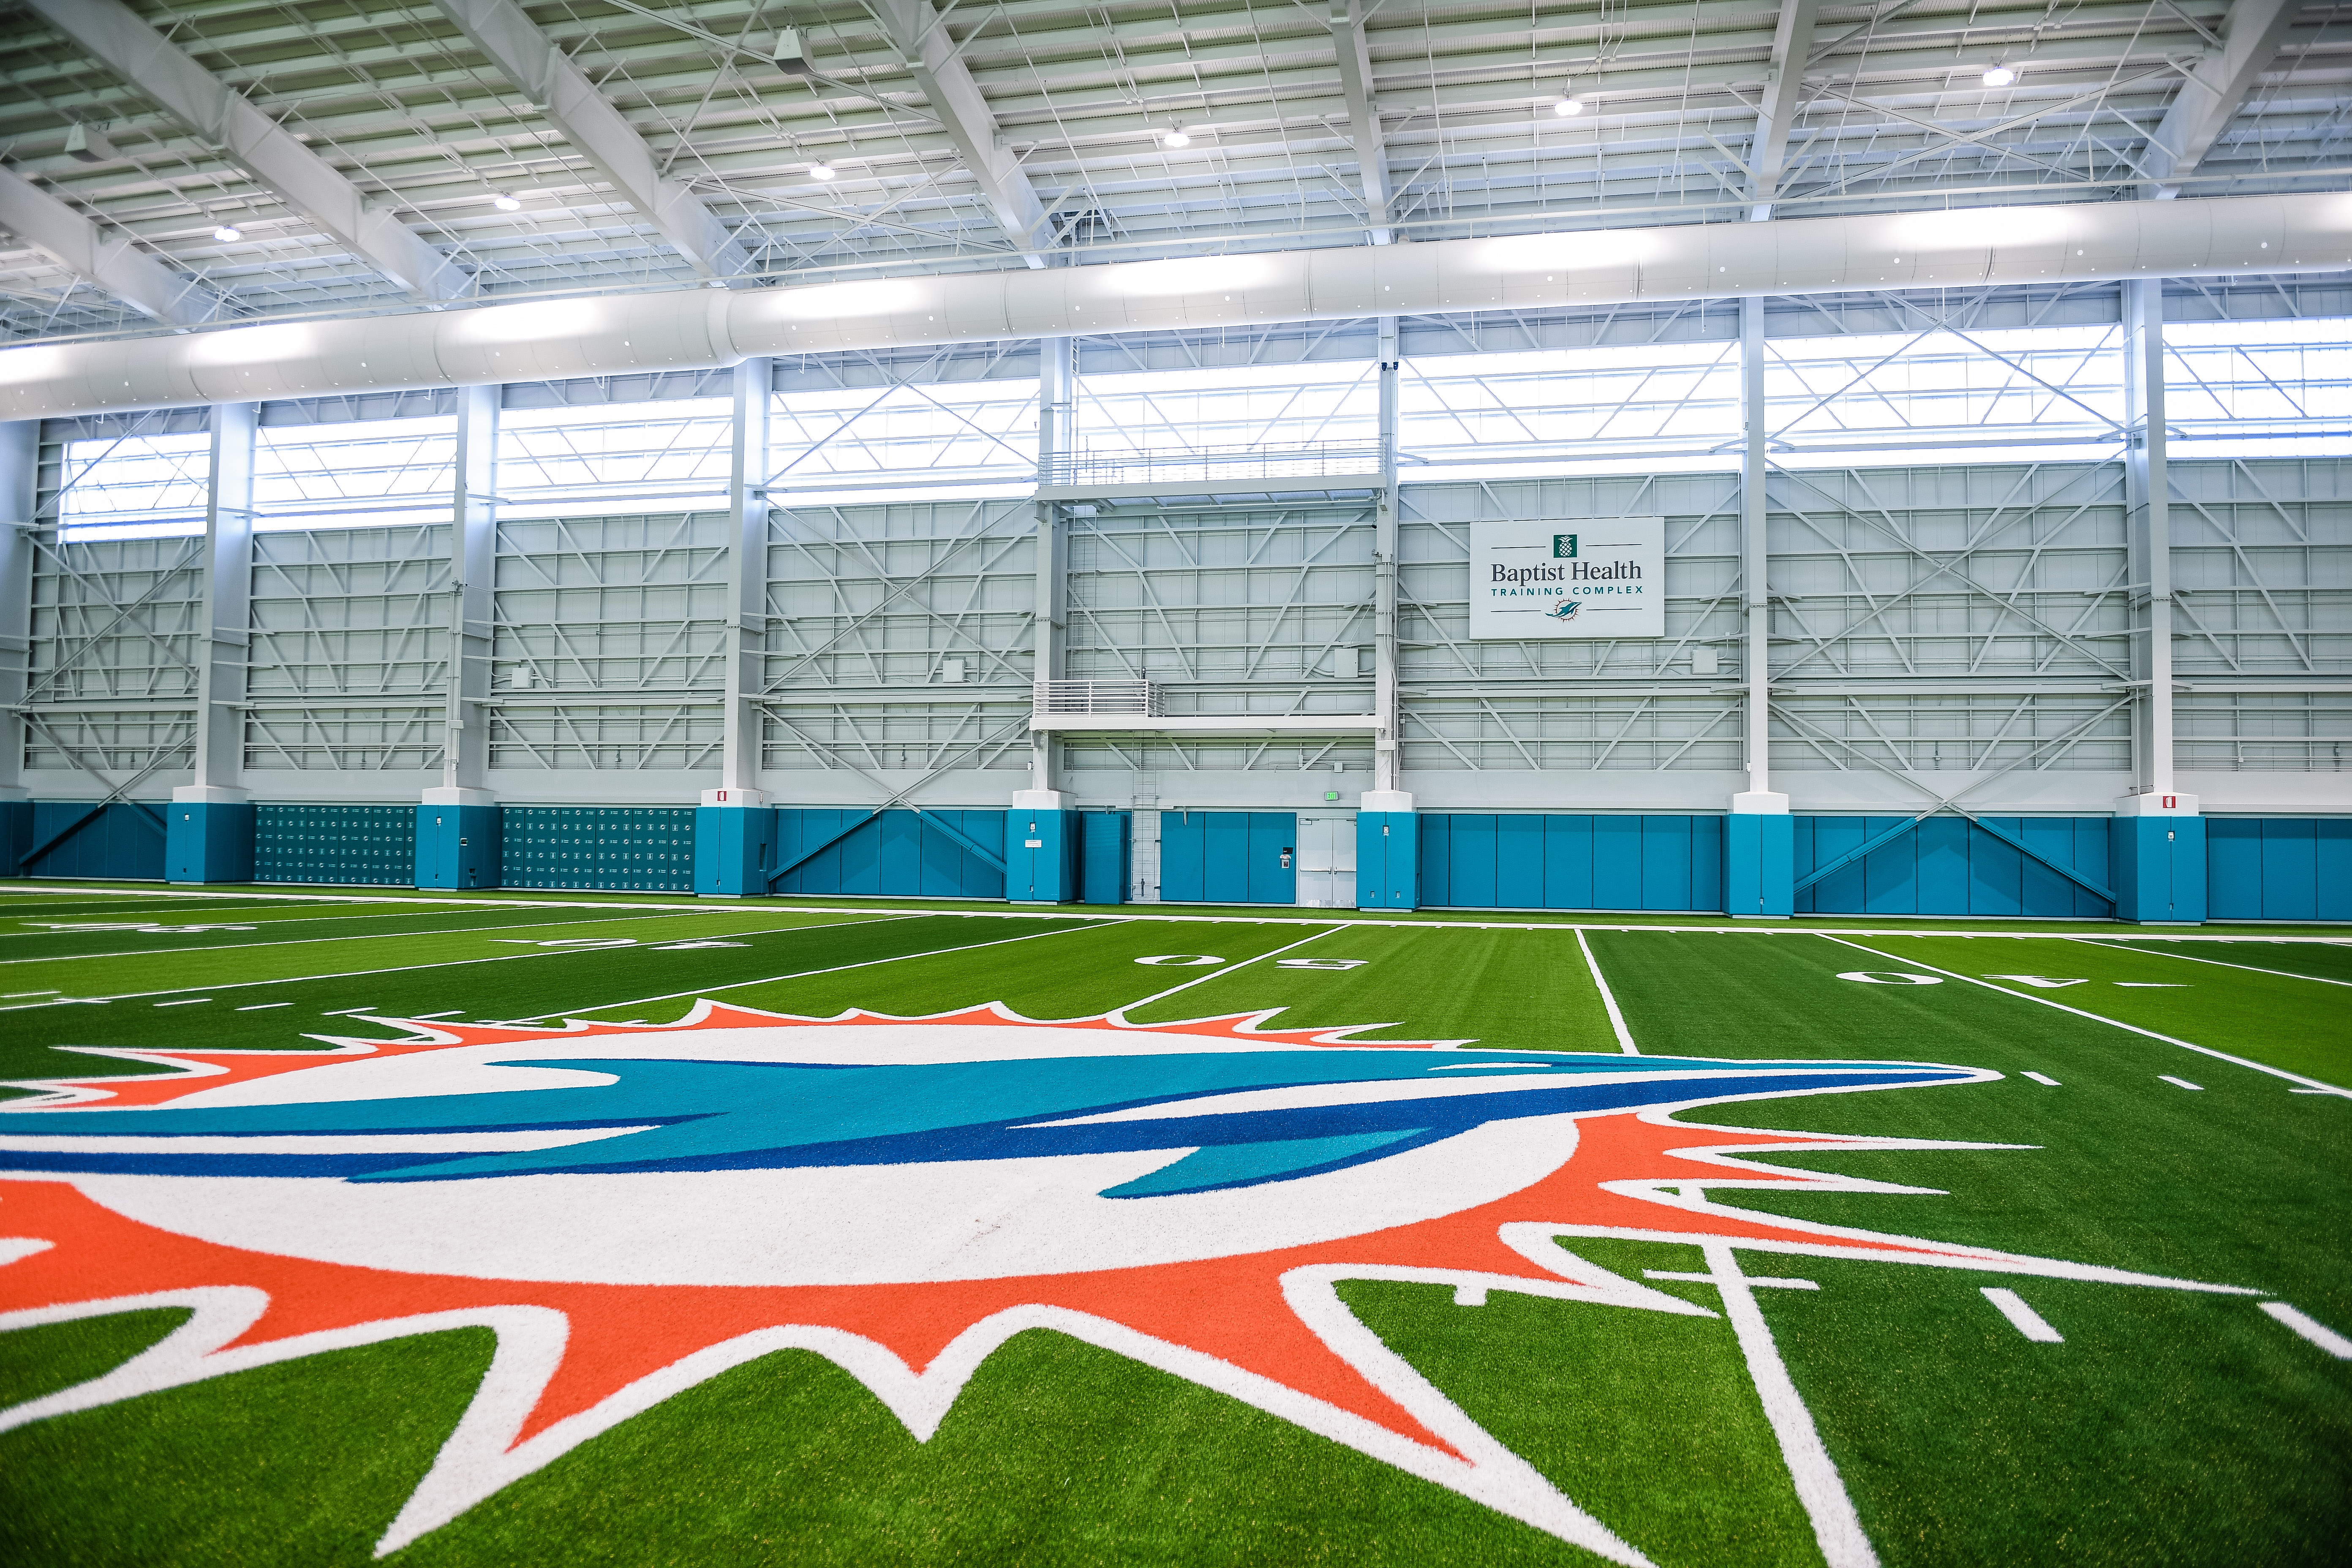 MIAMI DOLPHINS STATE-OF-THE-ART TRAINING FACILITY INCLUDES GEO COOLFILL BY  HELLAS CONSTRUCTION